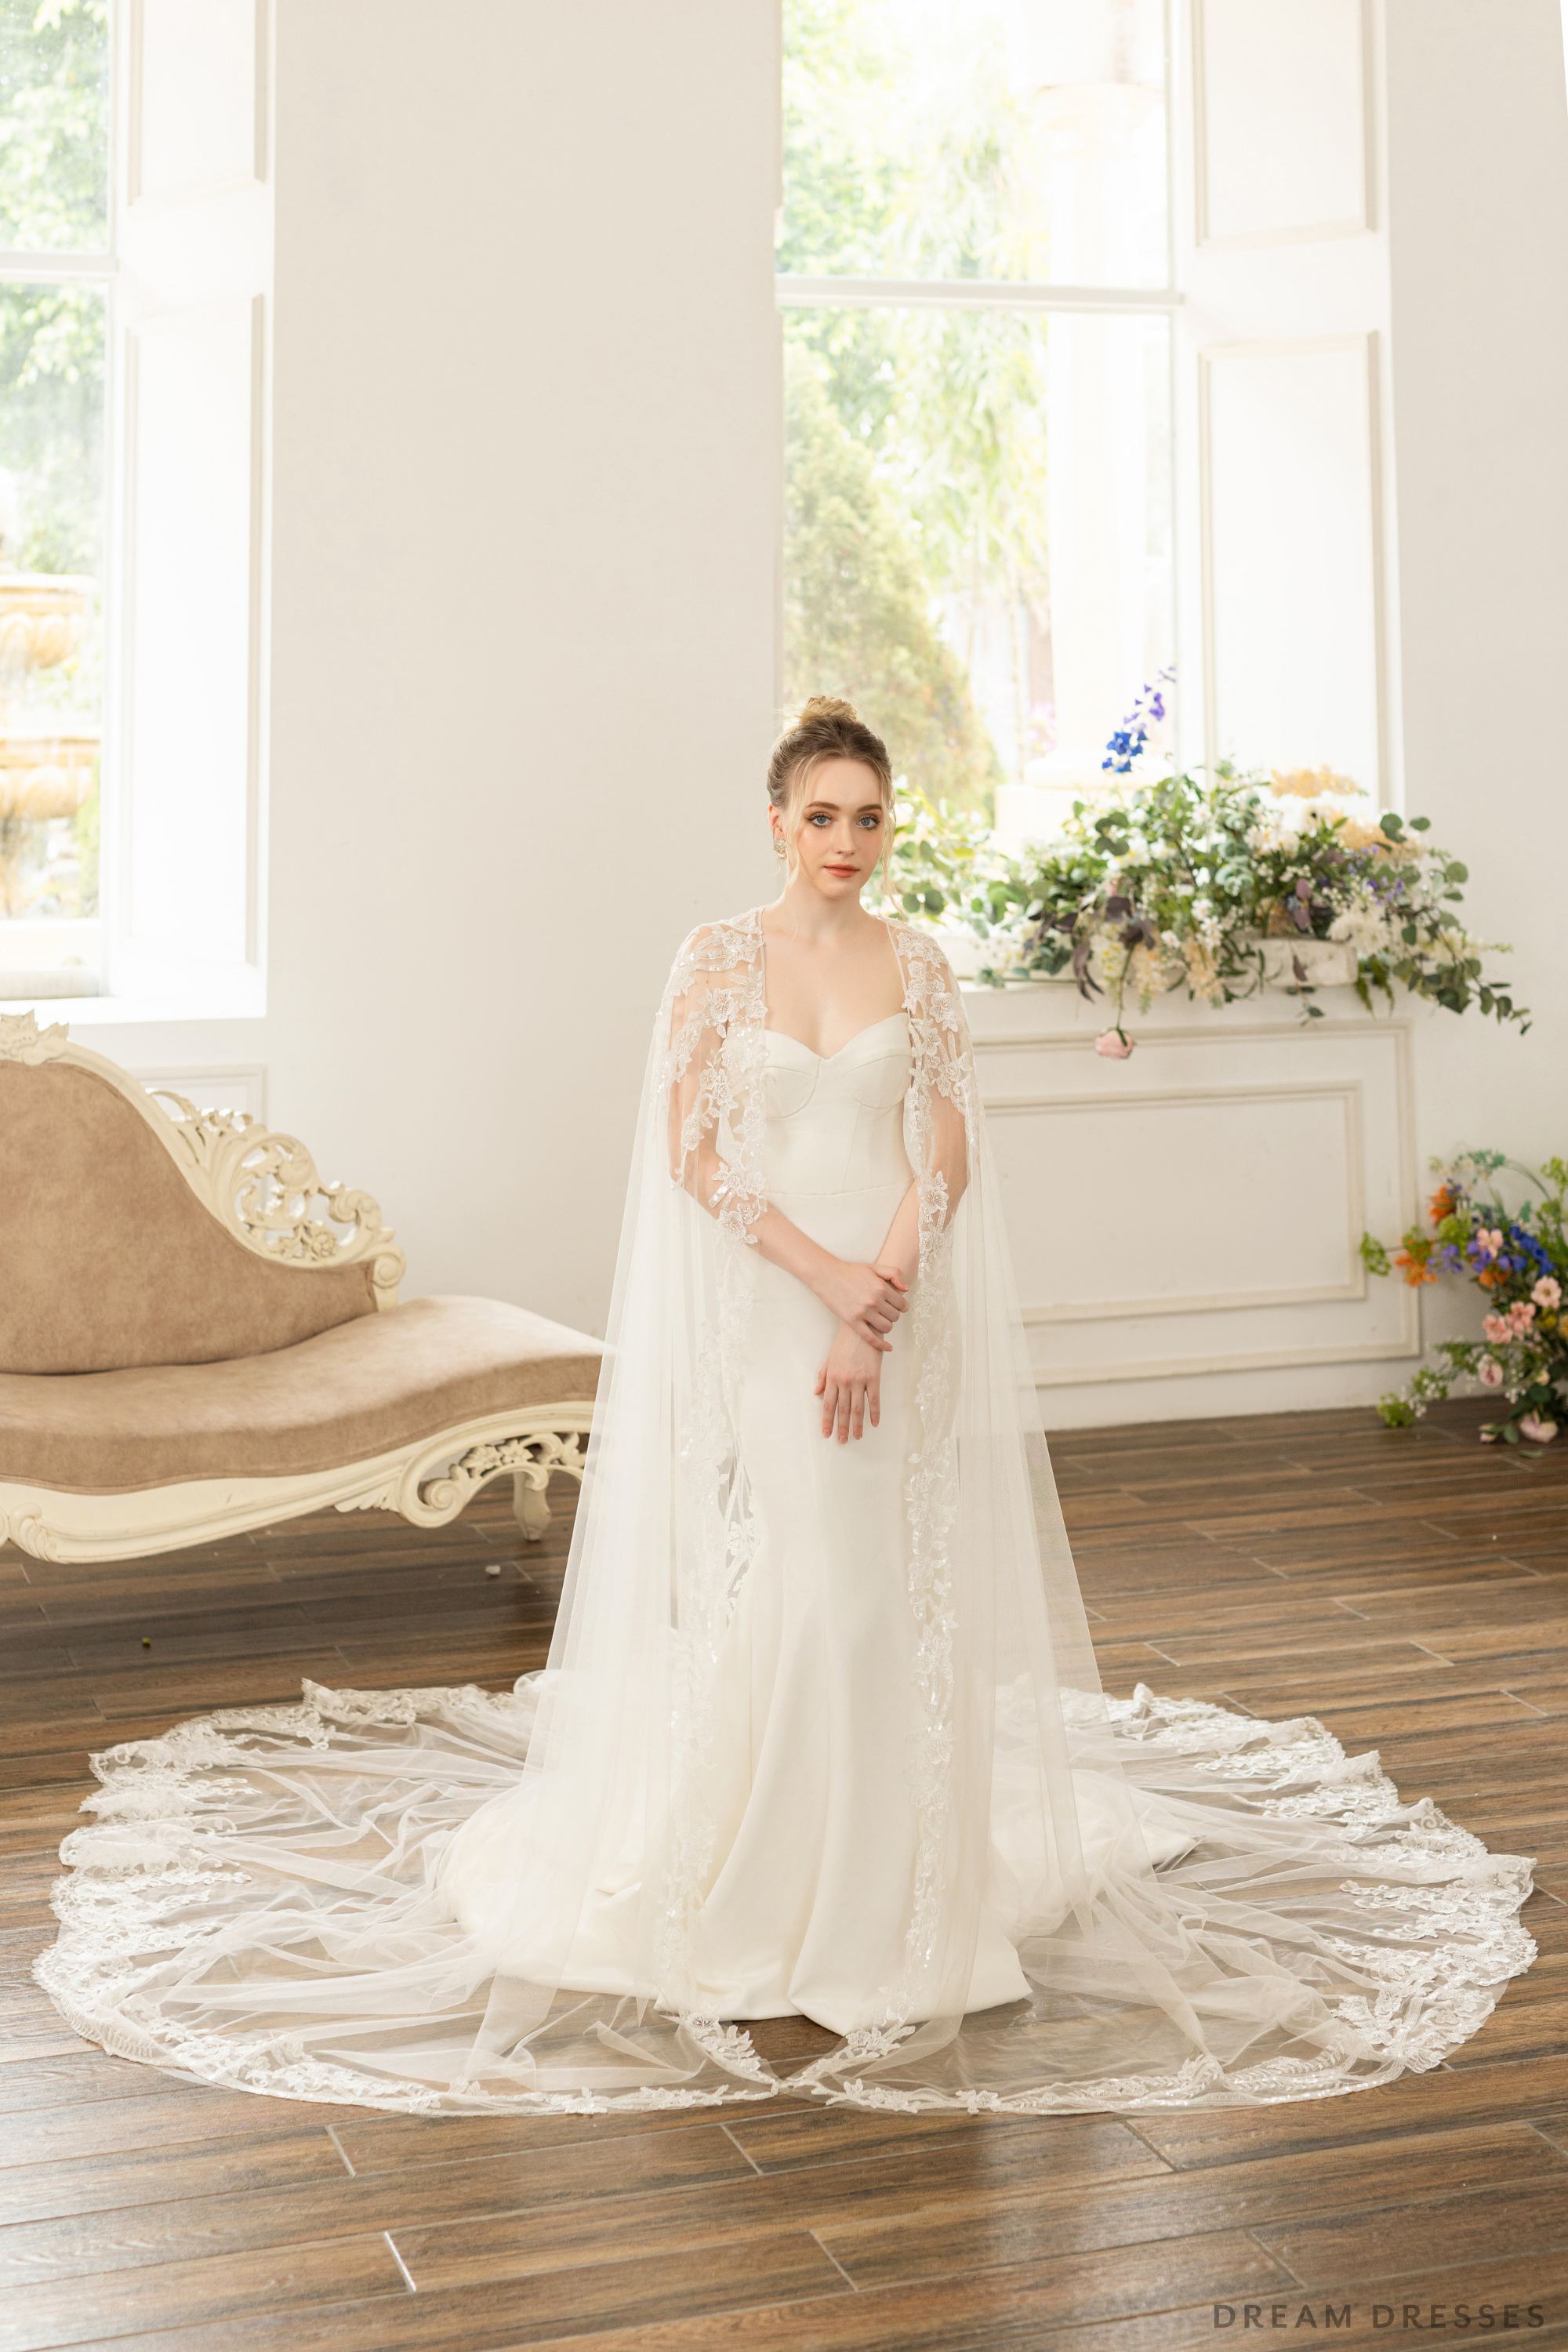 Bridal Cape with Floral Lace (#AXELLE)